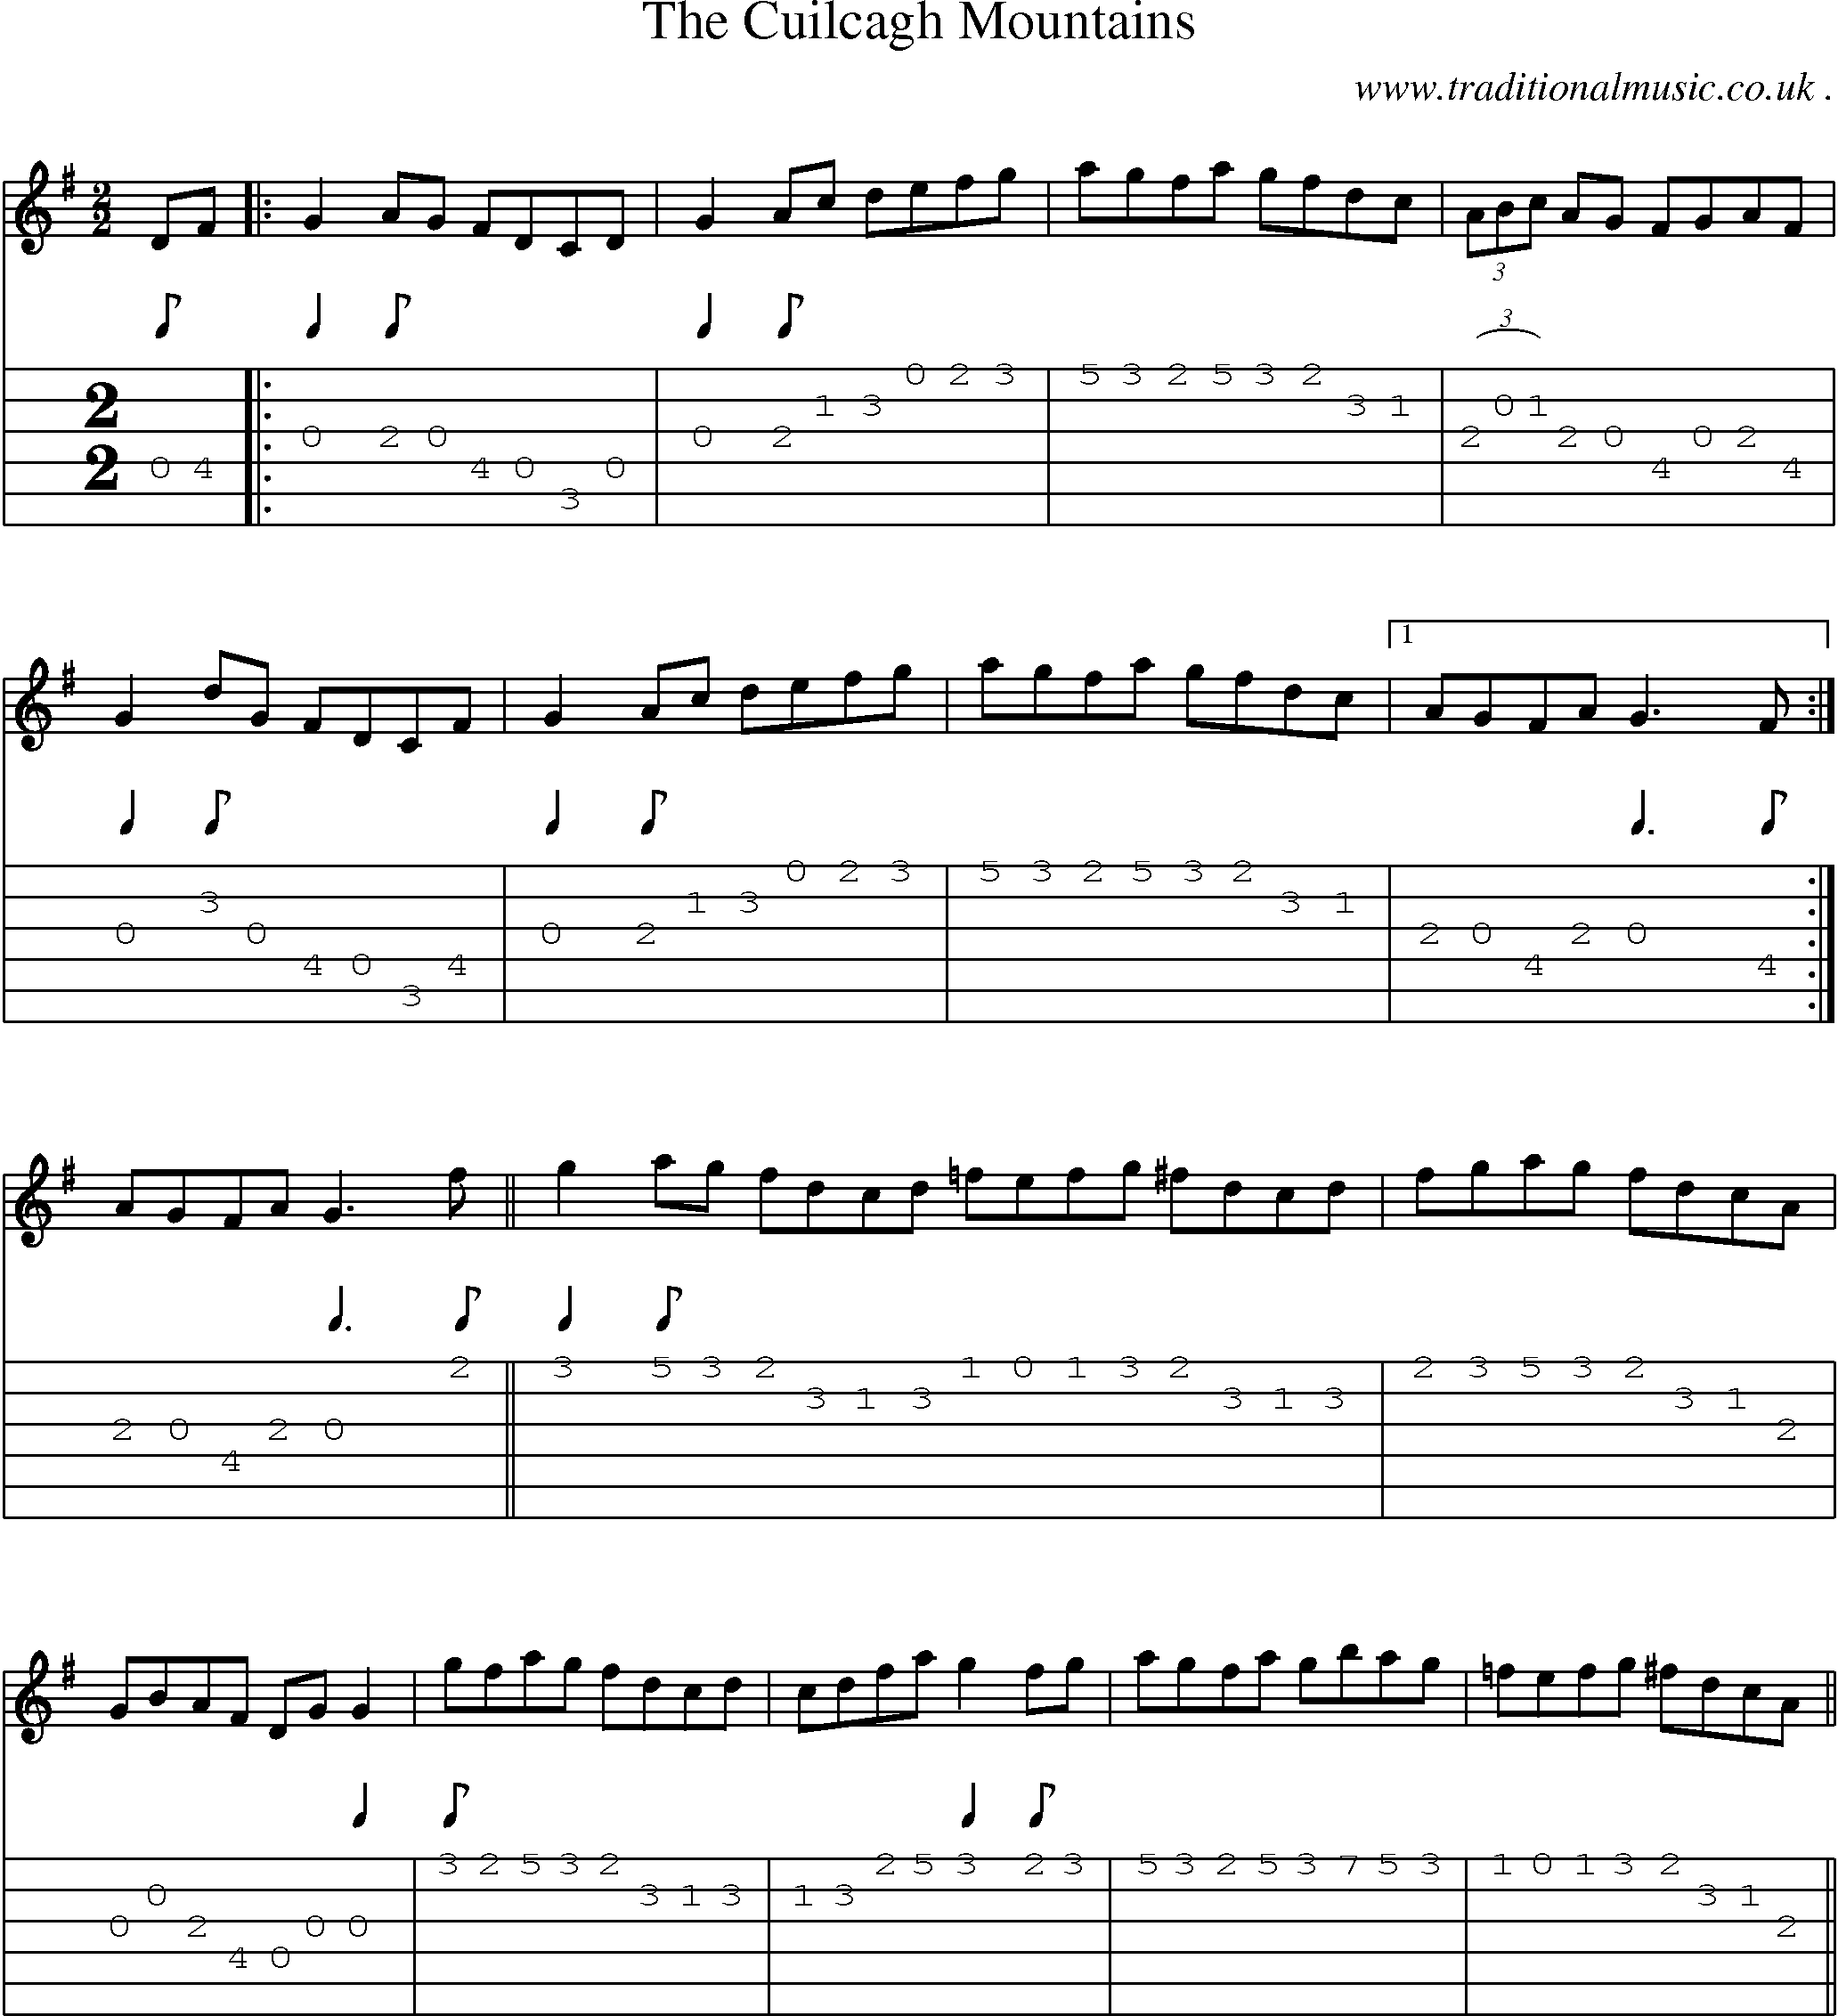 Sheet-Music and Guitar Tabs for The Cuilcagh Mountains